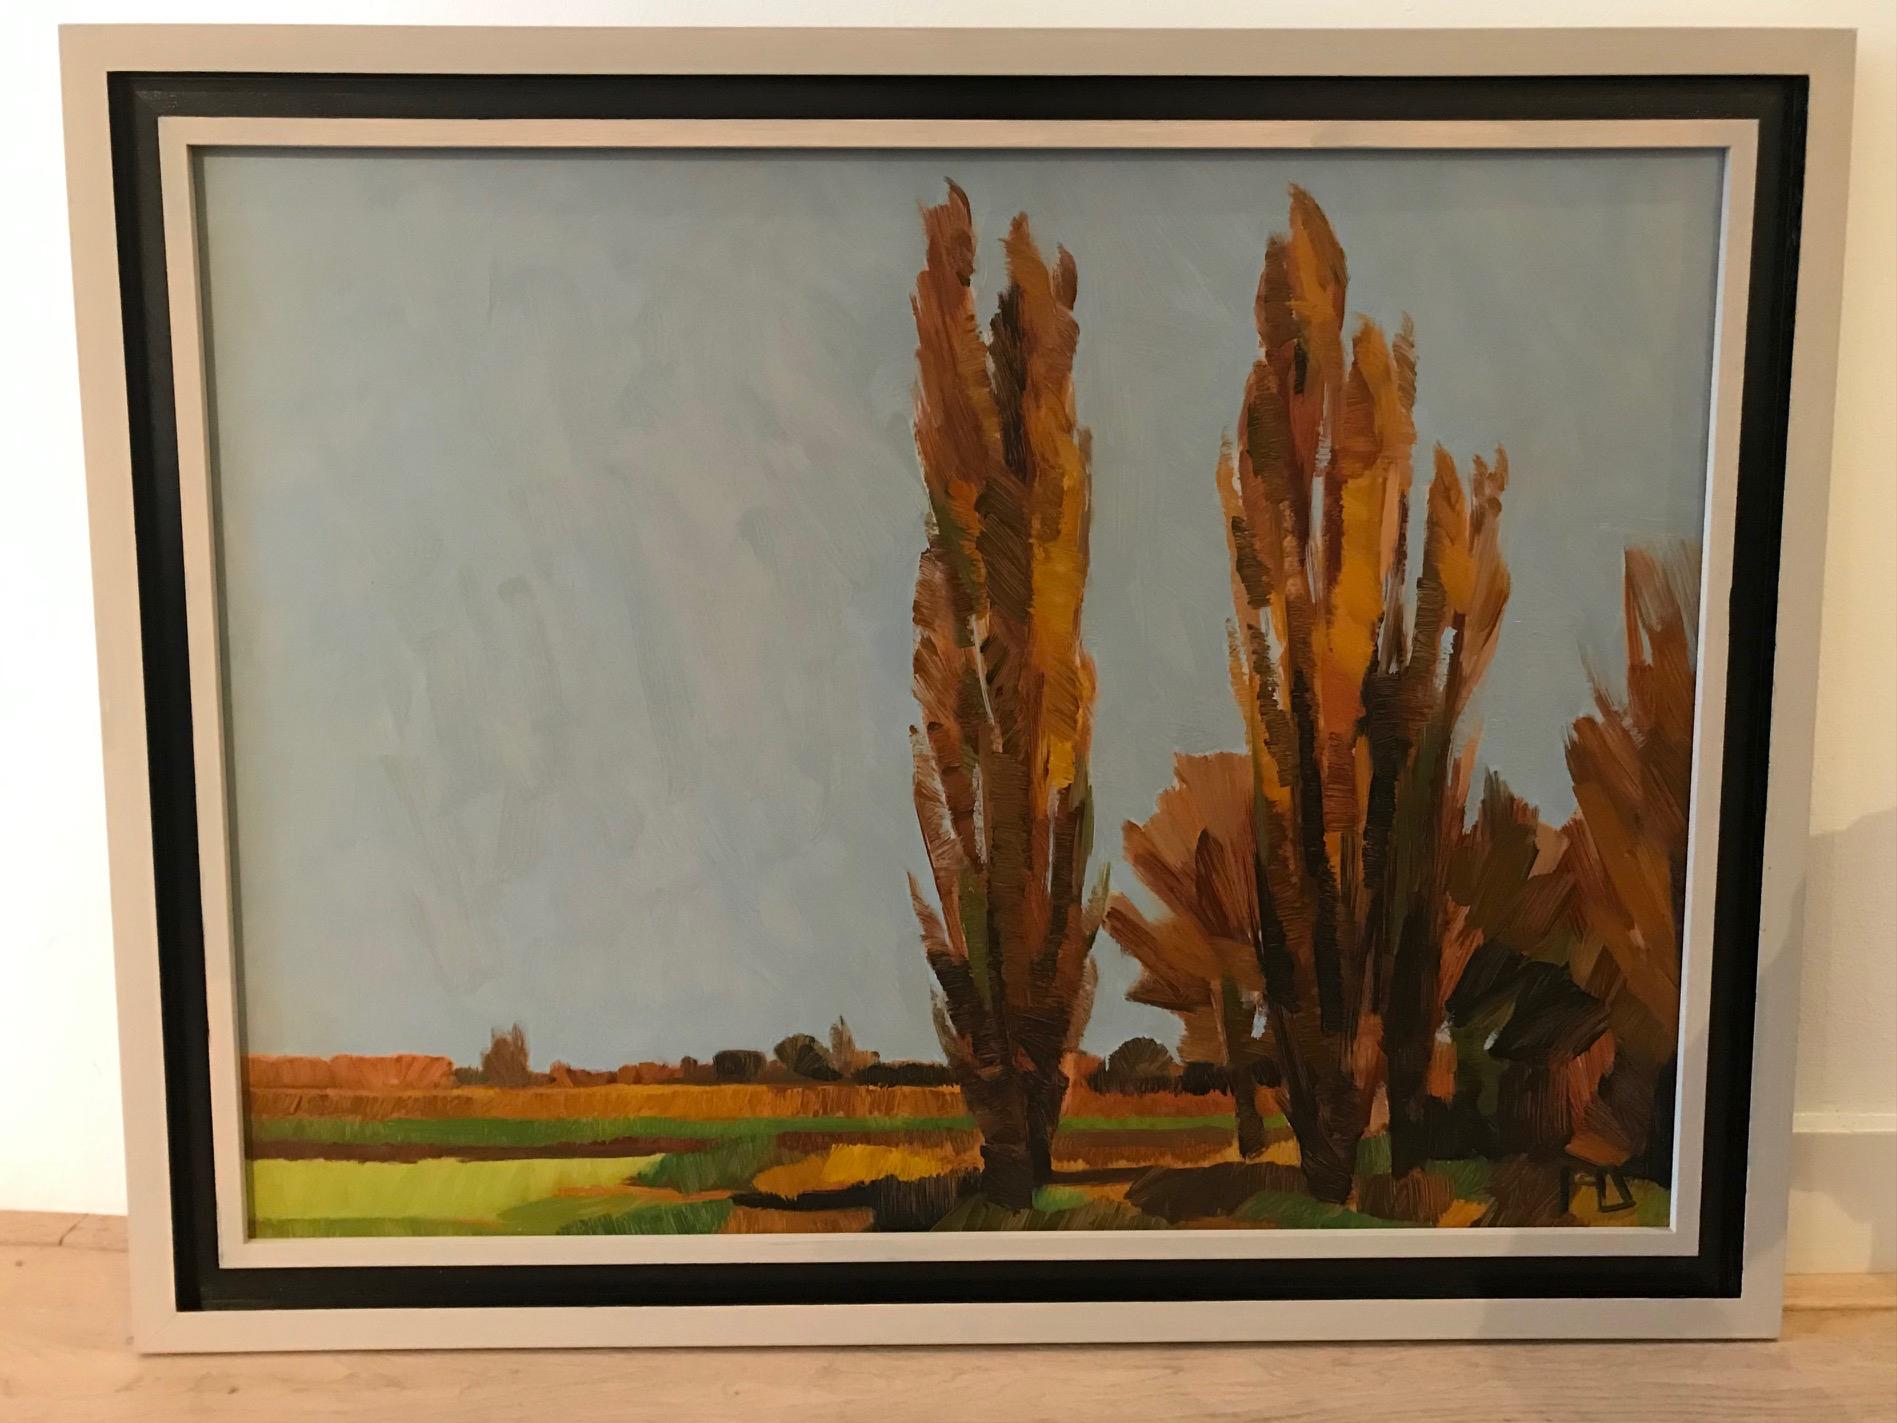 Frank Dekkers (1961) is a landscape painter par excellence. Full of dedication and diligence he always works on location outdoors, defying the elements. The weather plays an important role in his work: an emerging early winter, heavy summer rain,